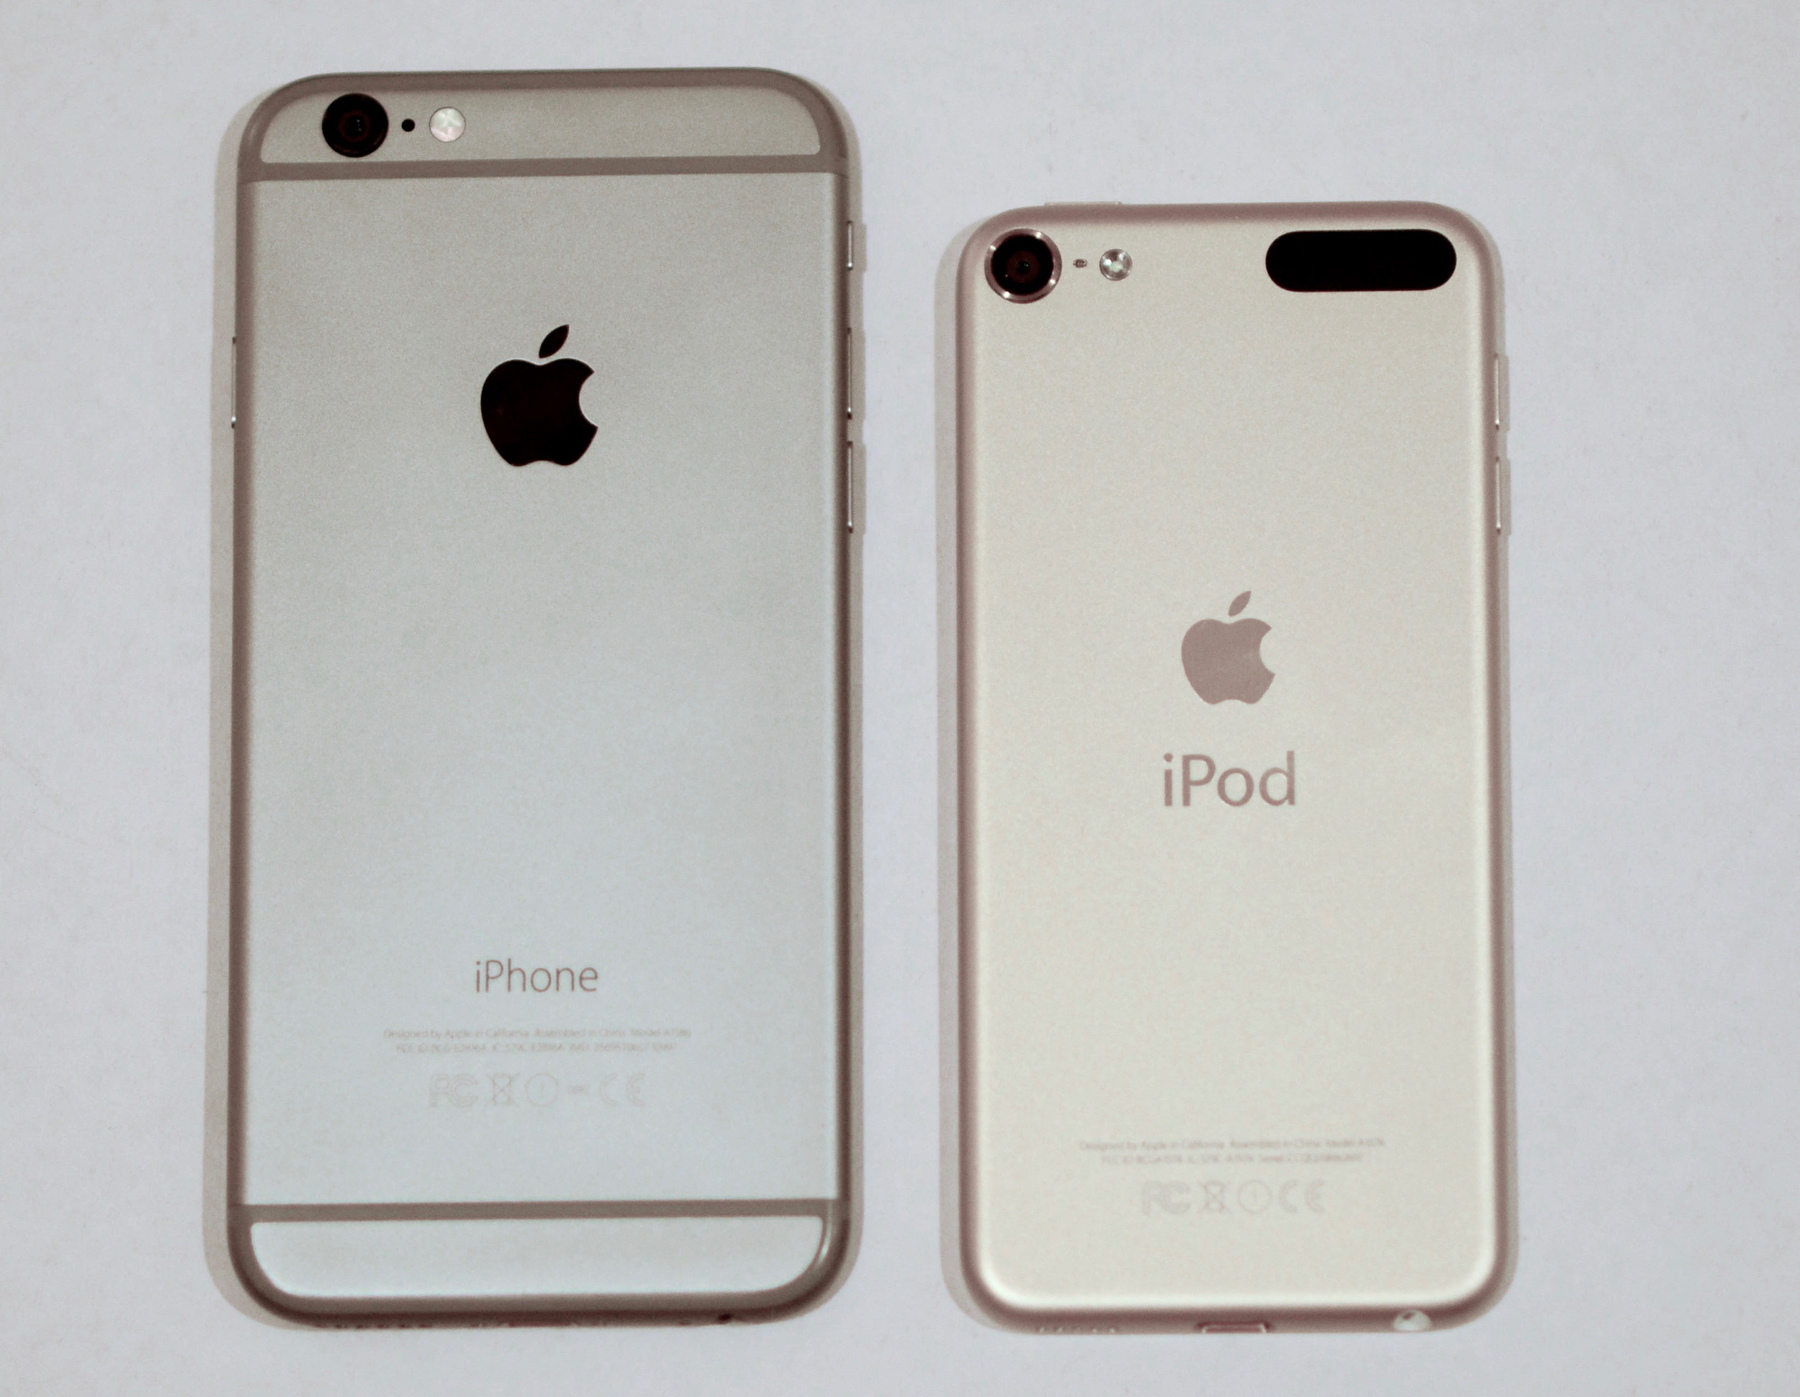 iPhone 6 and iPod touch